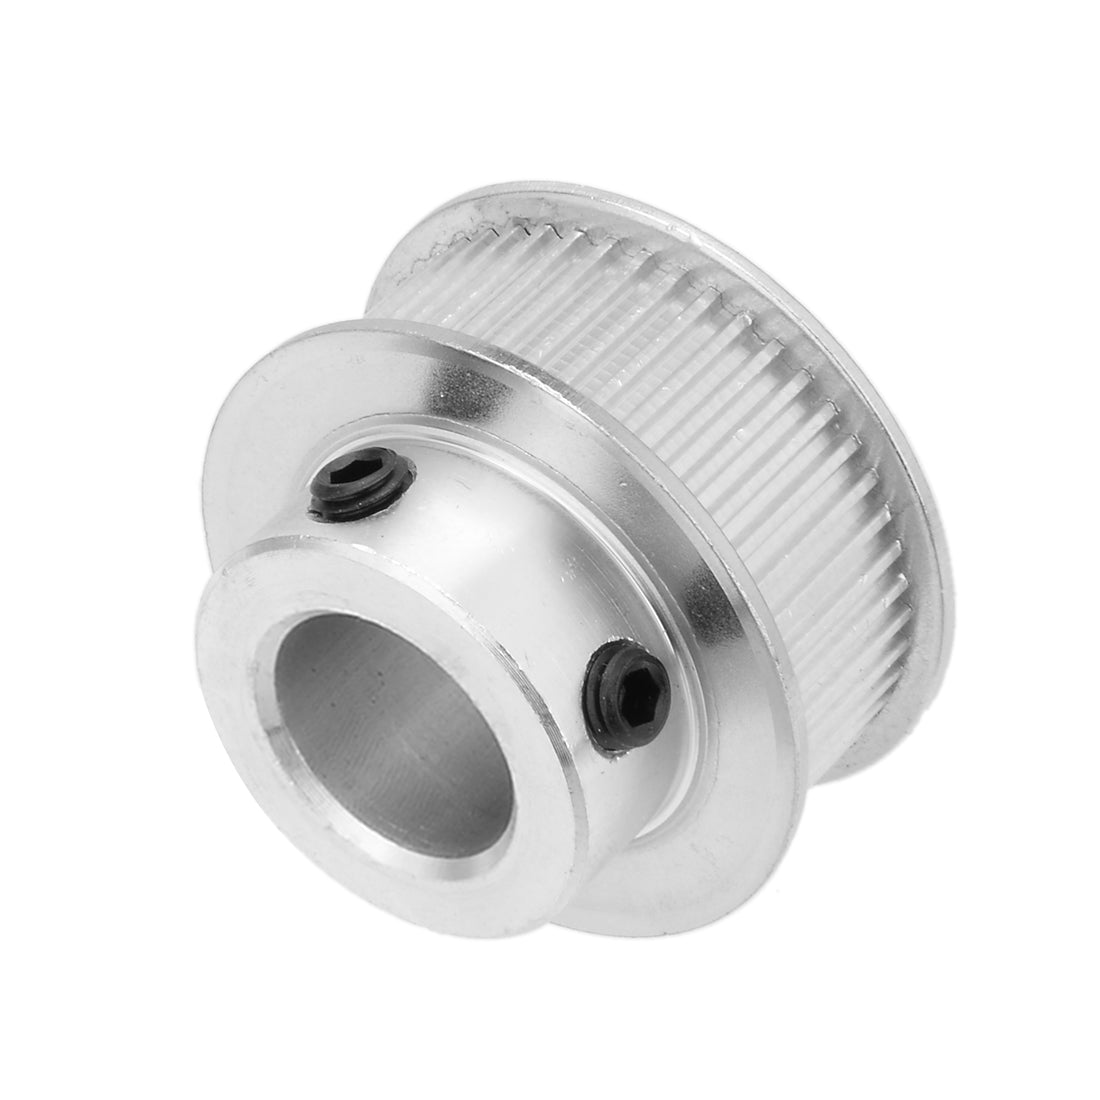 uxcell Uxcell Aluminum M-X-L 50 Teeth 12mm Bore Timing Belt Idler Pulley Synchronous Wheel 10mm Belt for 3D Printer CNC